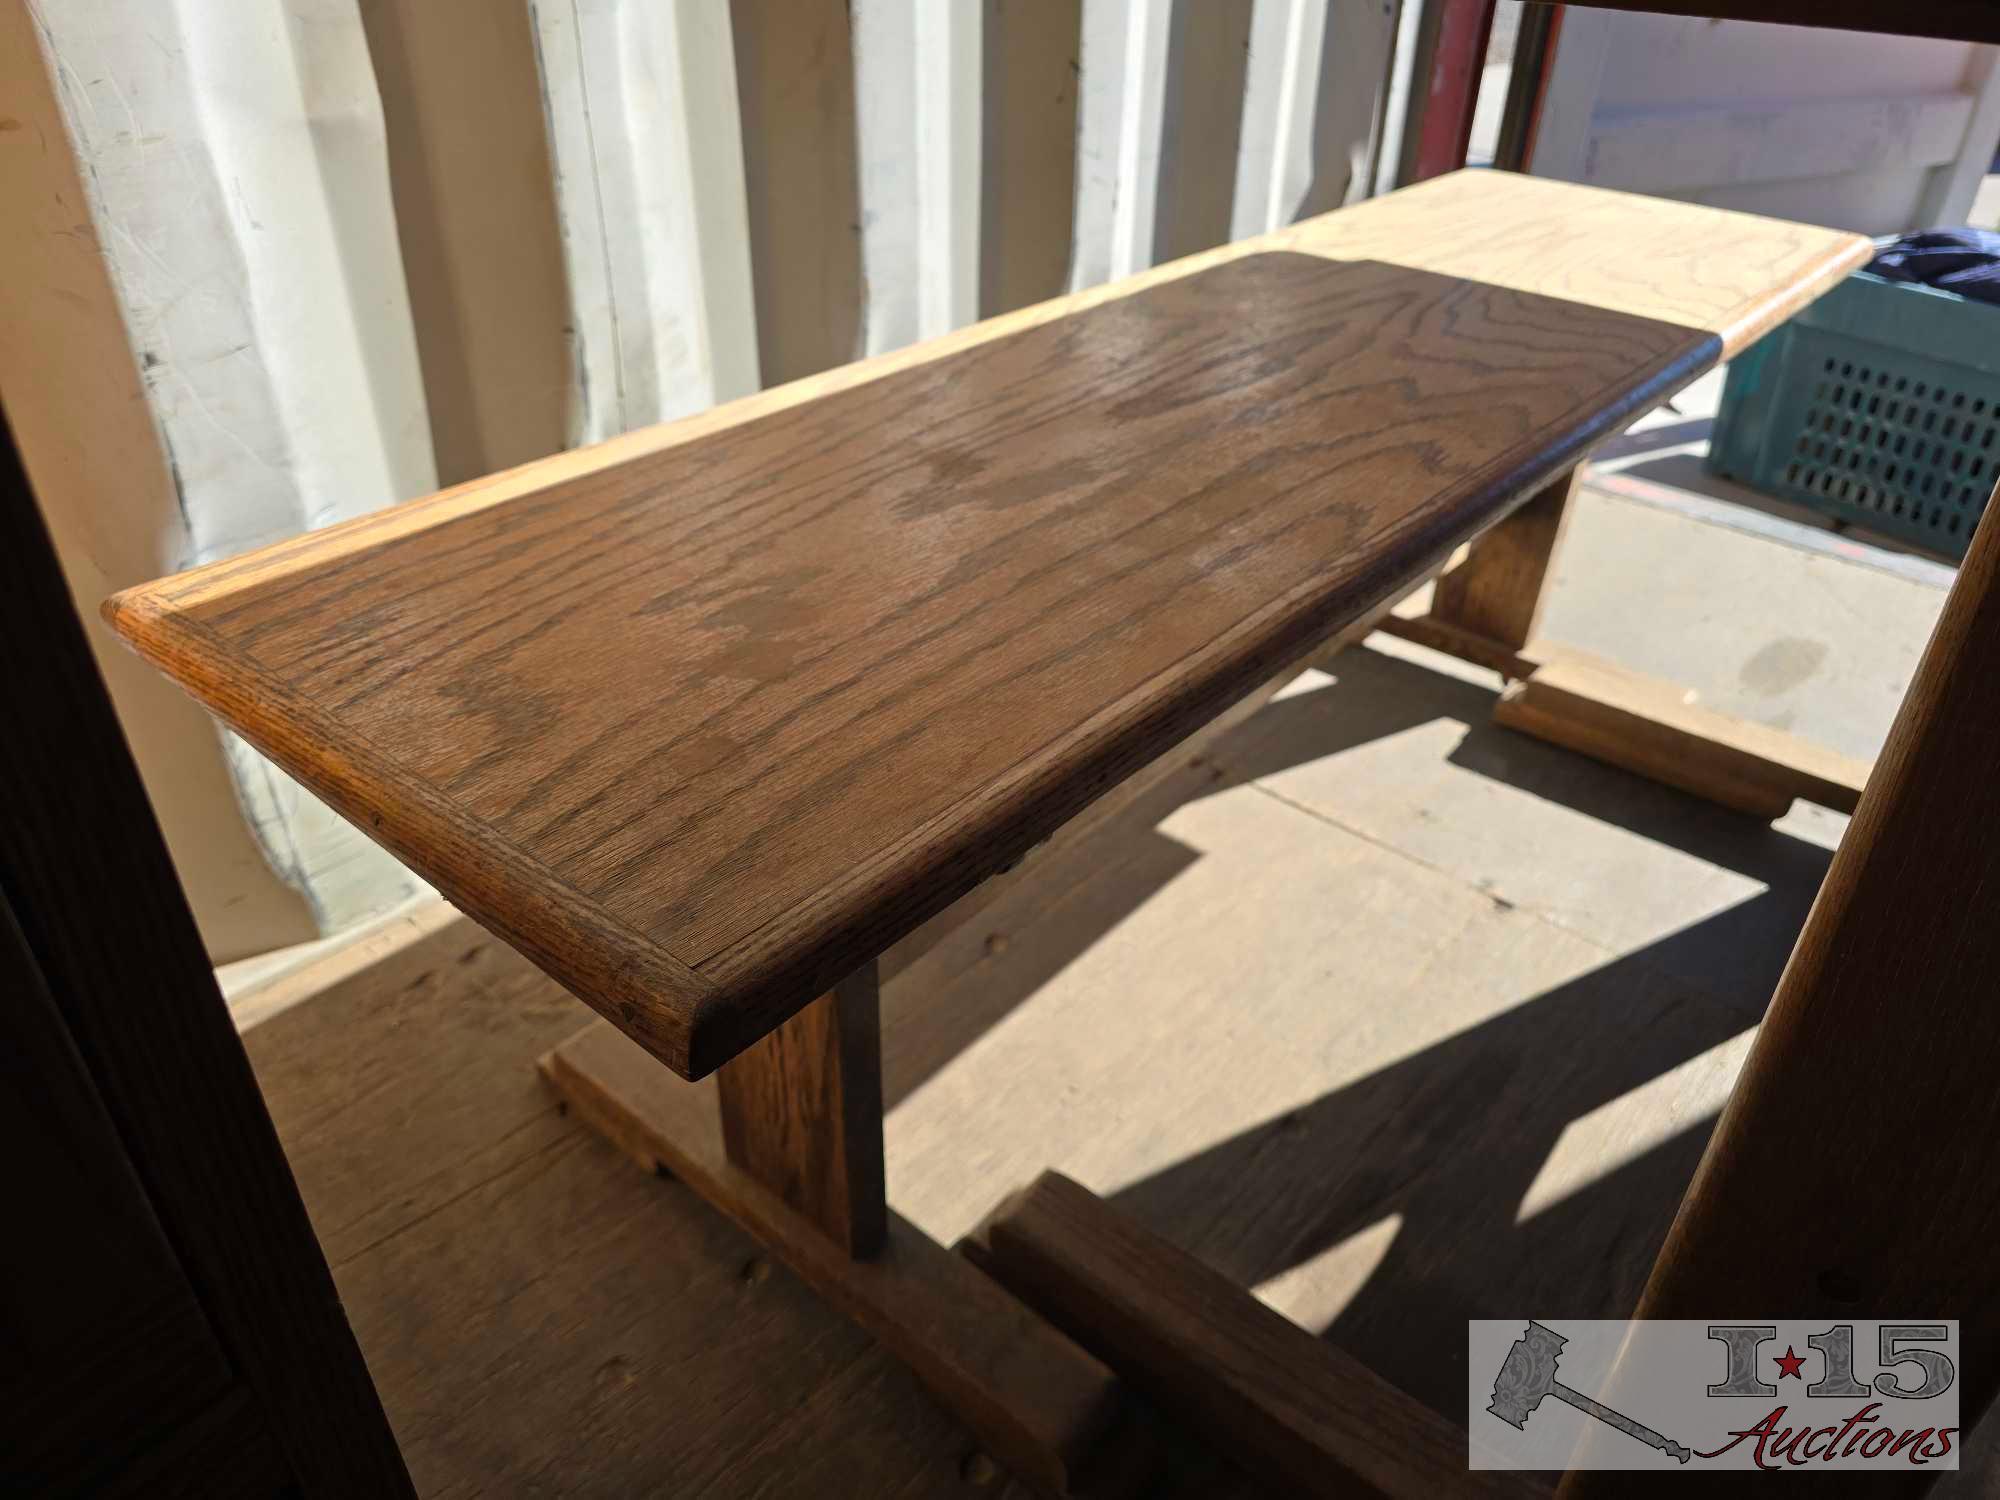 Wooden Table with Bench Seat